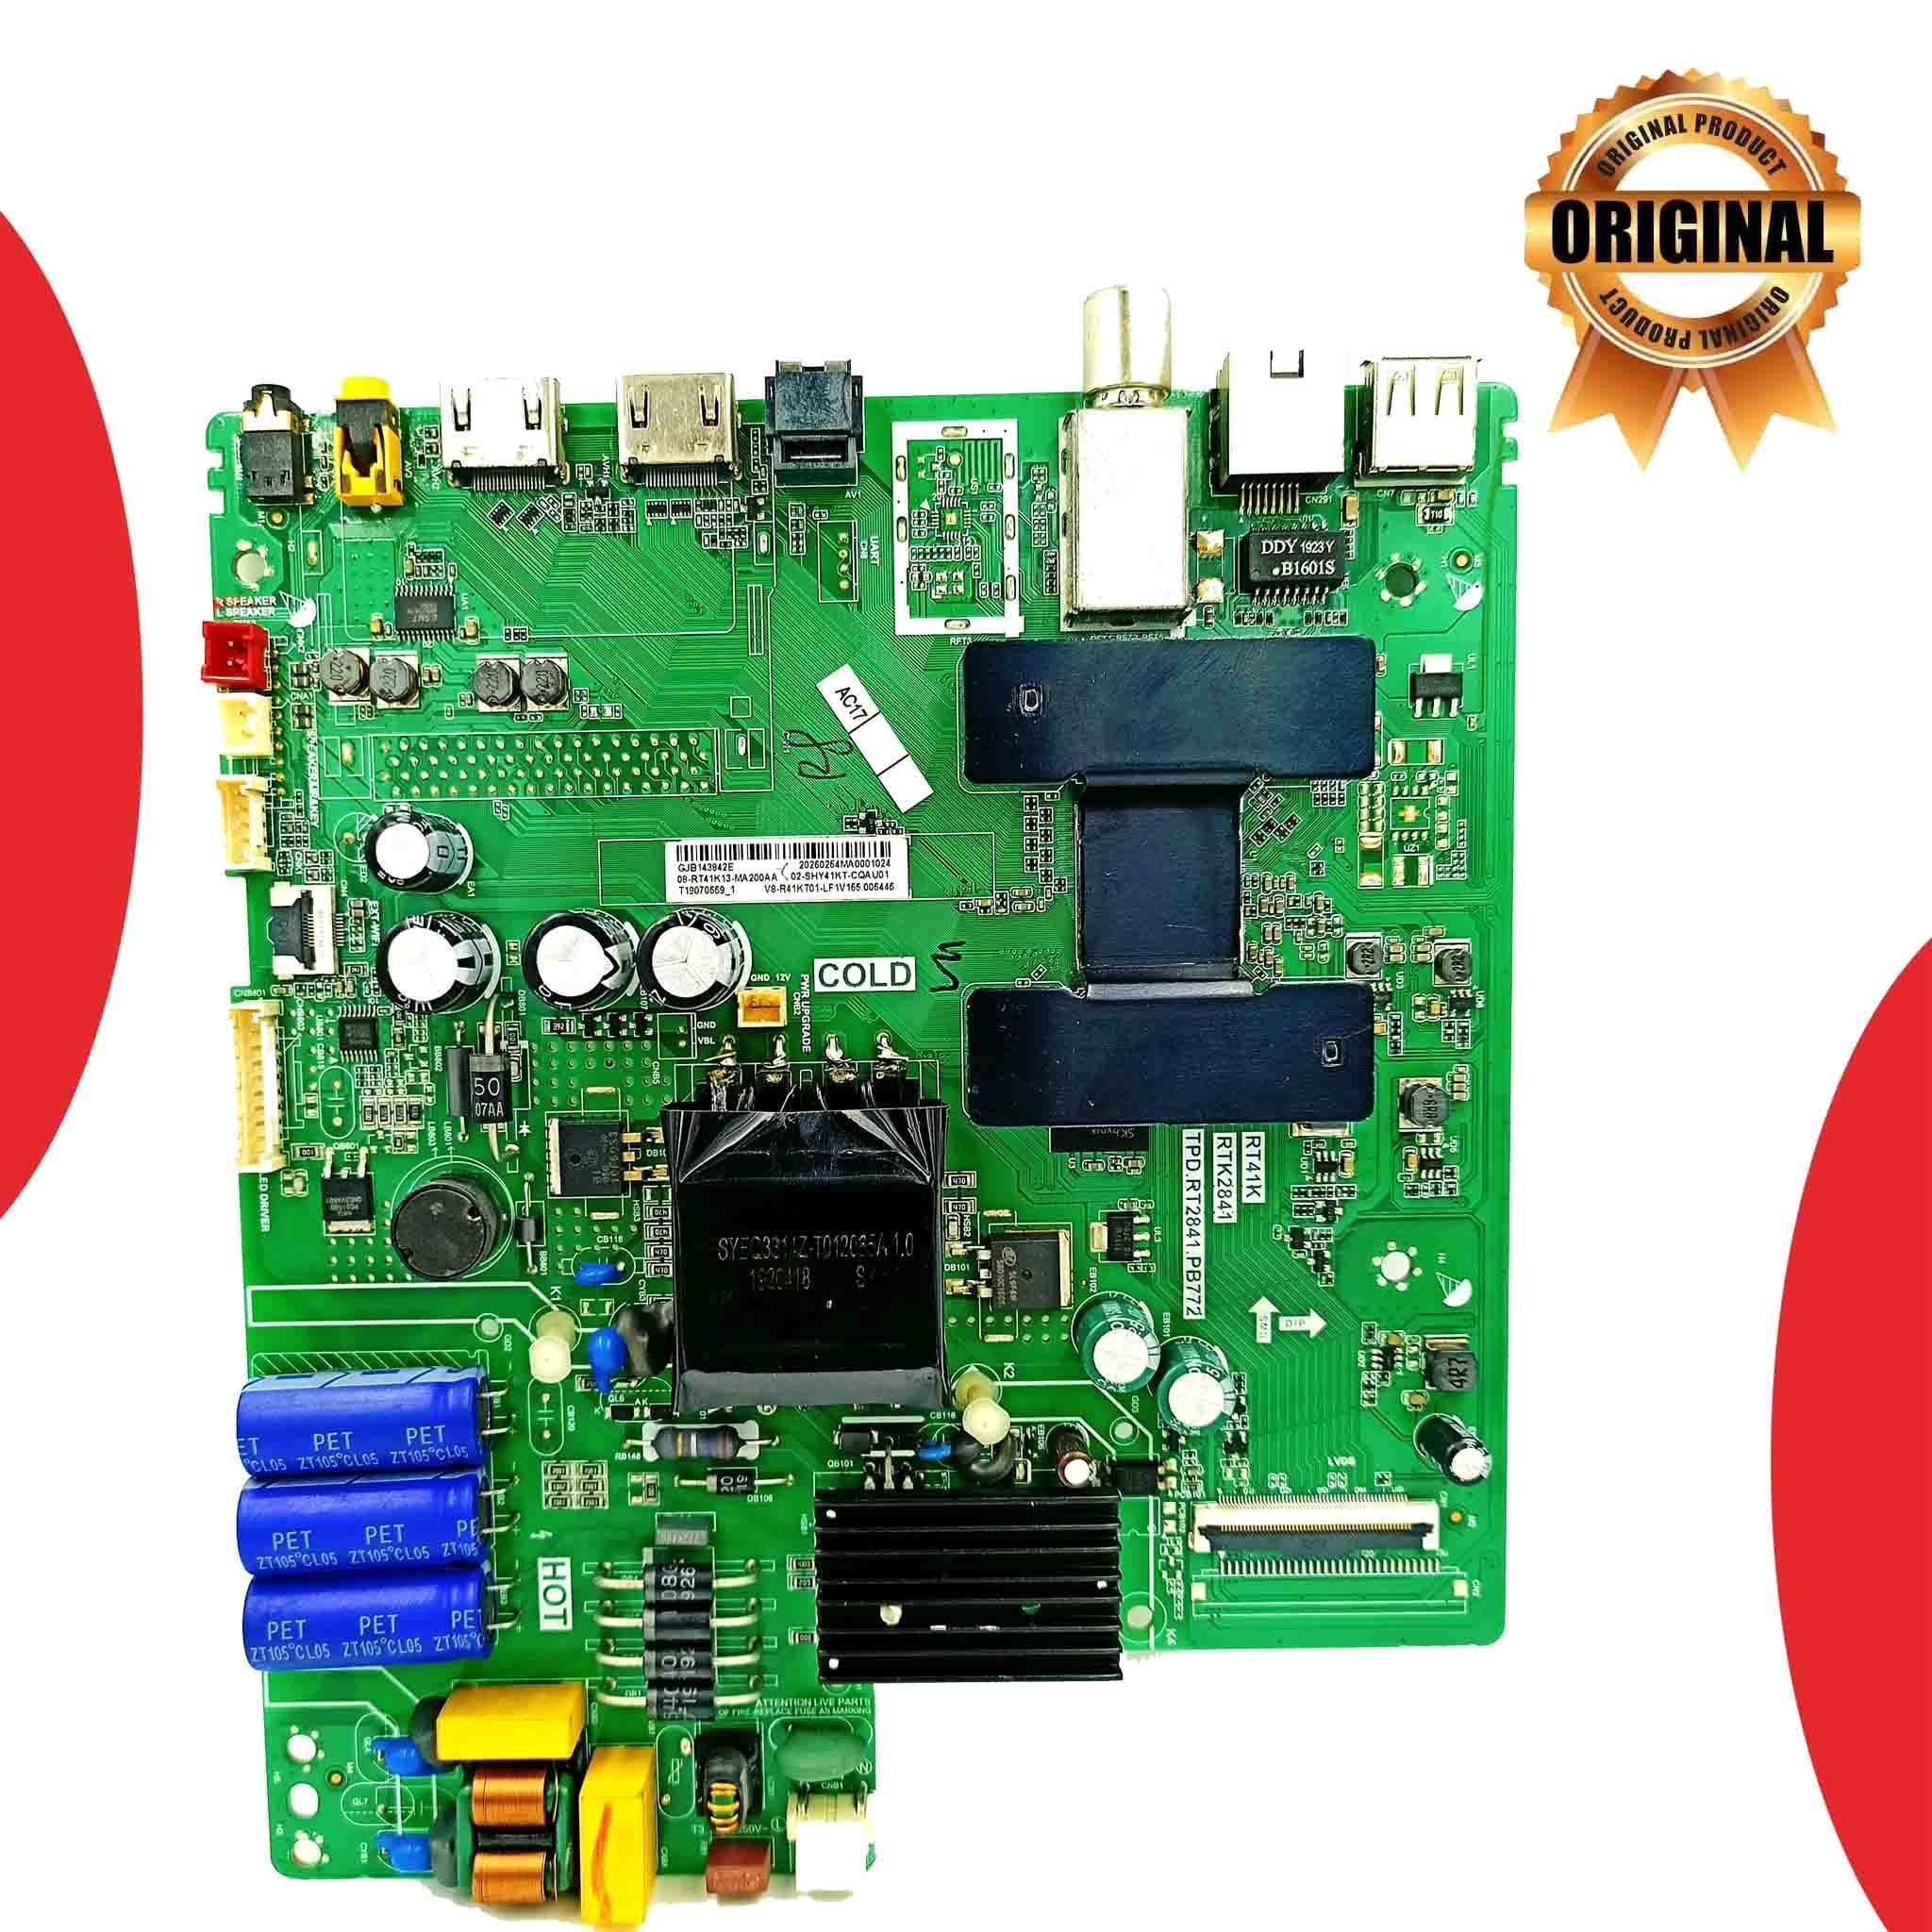 iFFALCON 49 inch LED TV Motherboard for Model 49F2A - Great Bharat Electronics